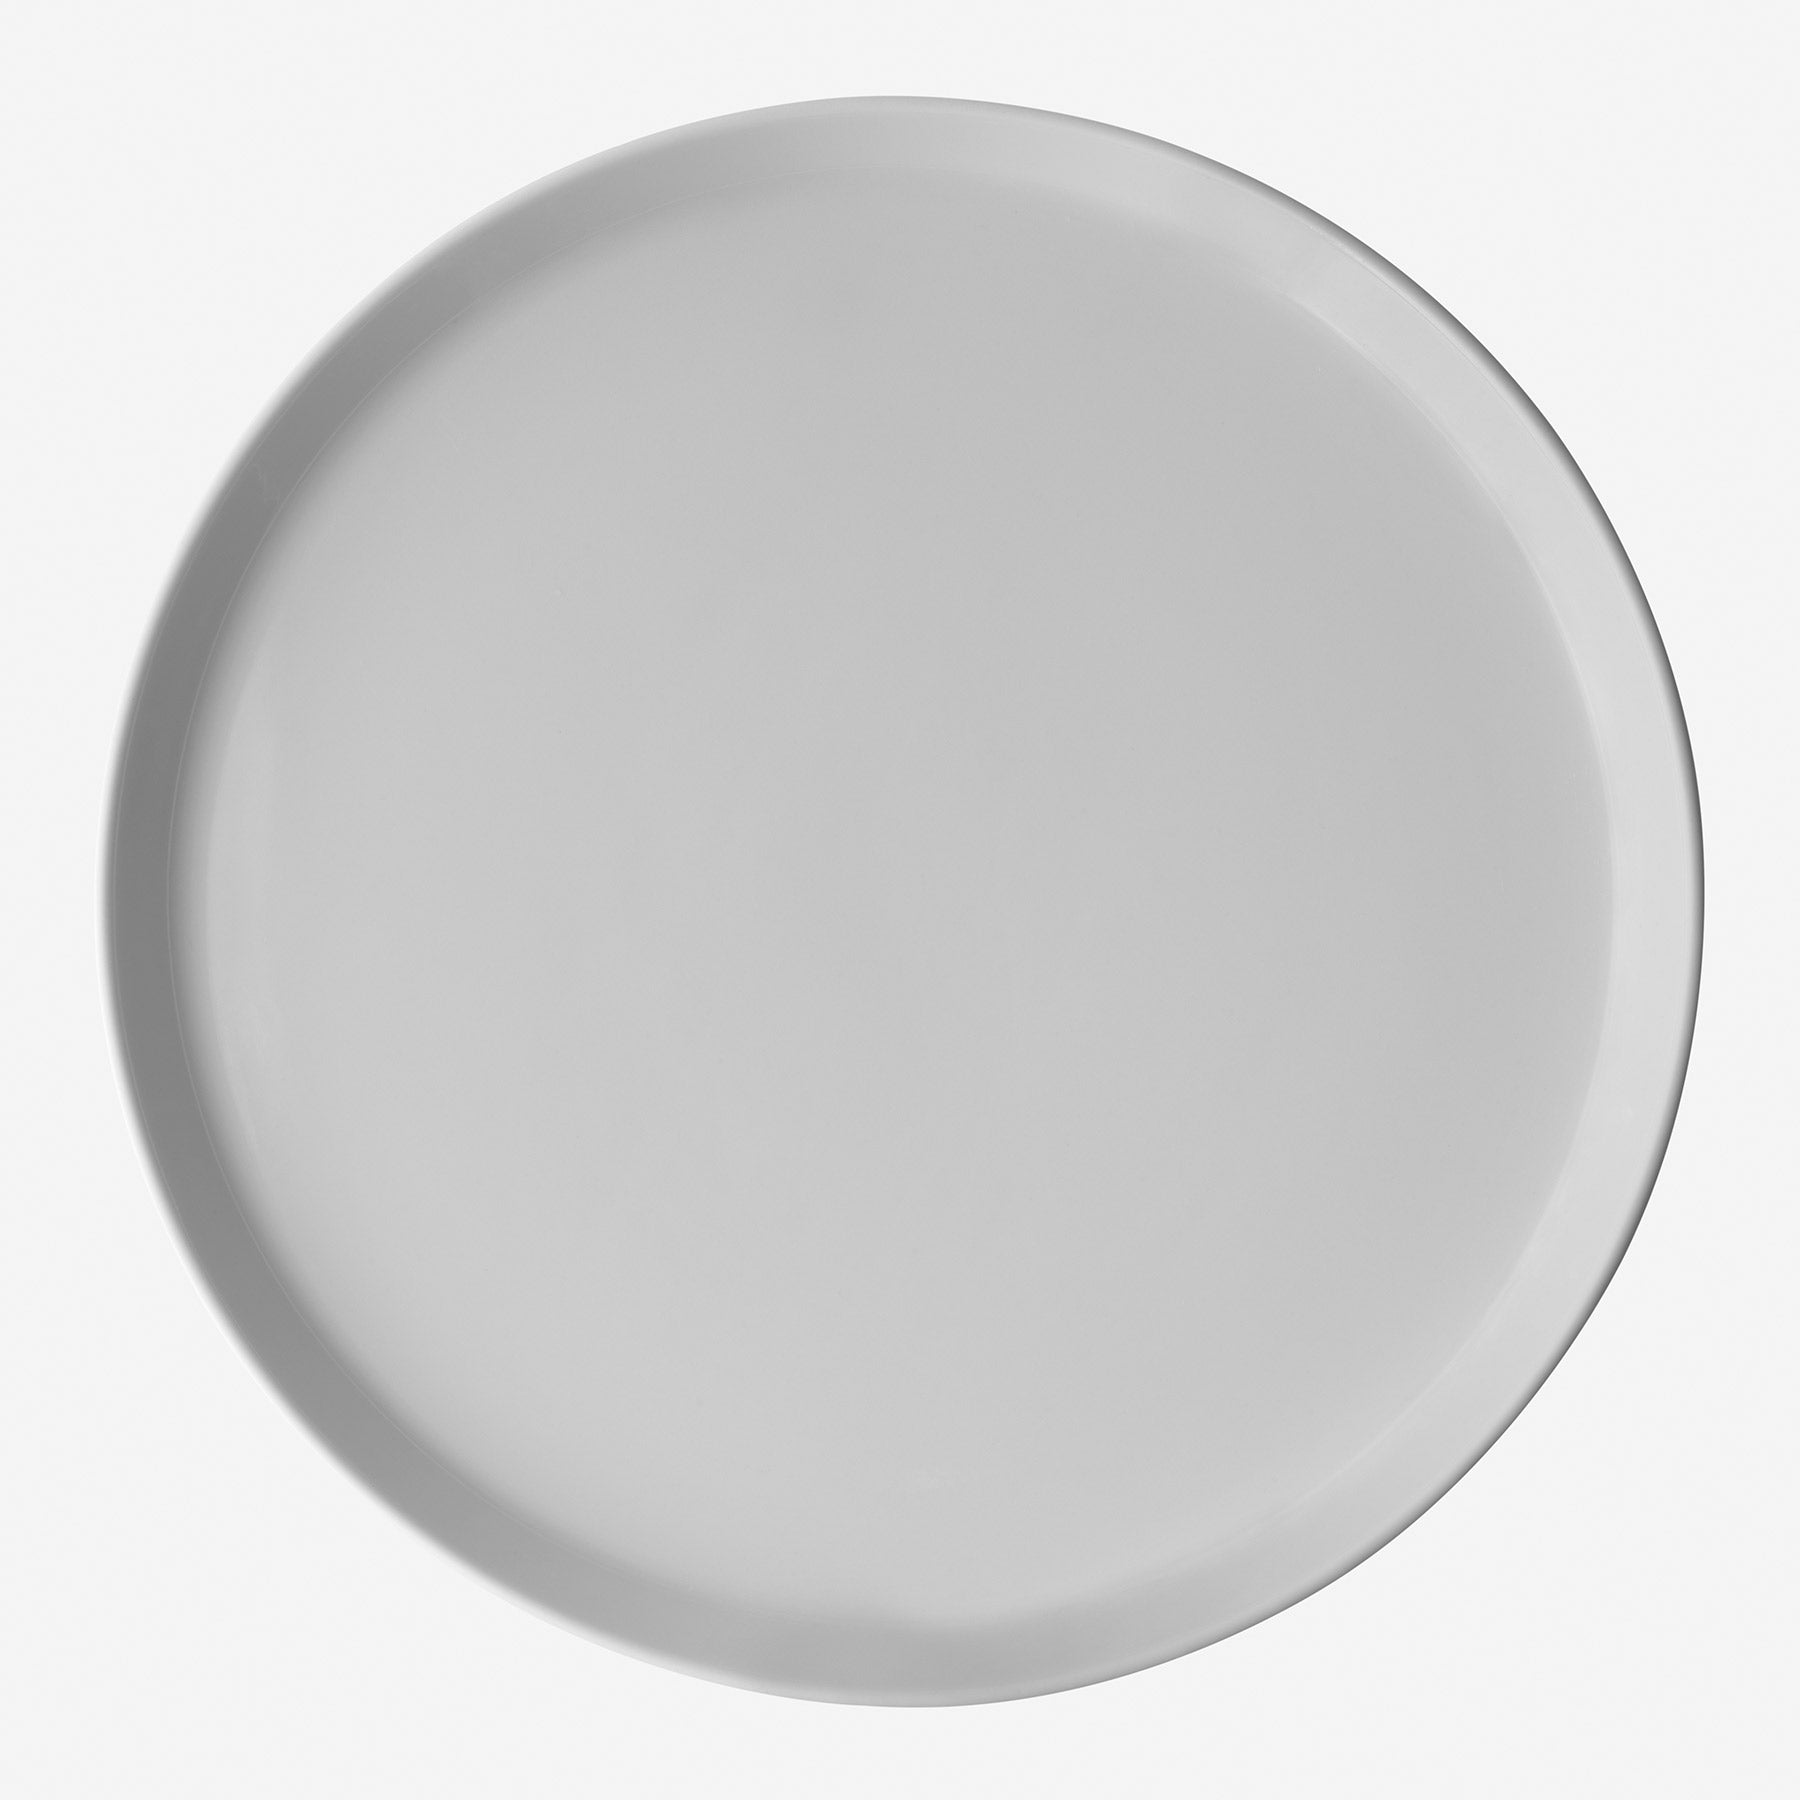 Vipp 213 Hand Casted Dinner Plate 2 pcs